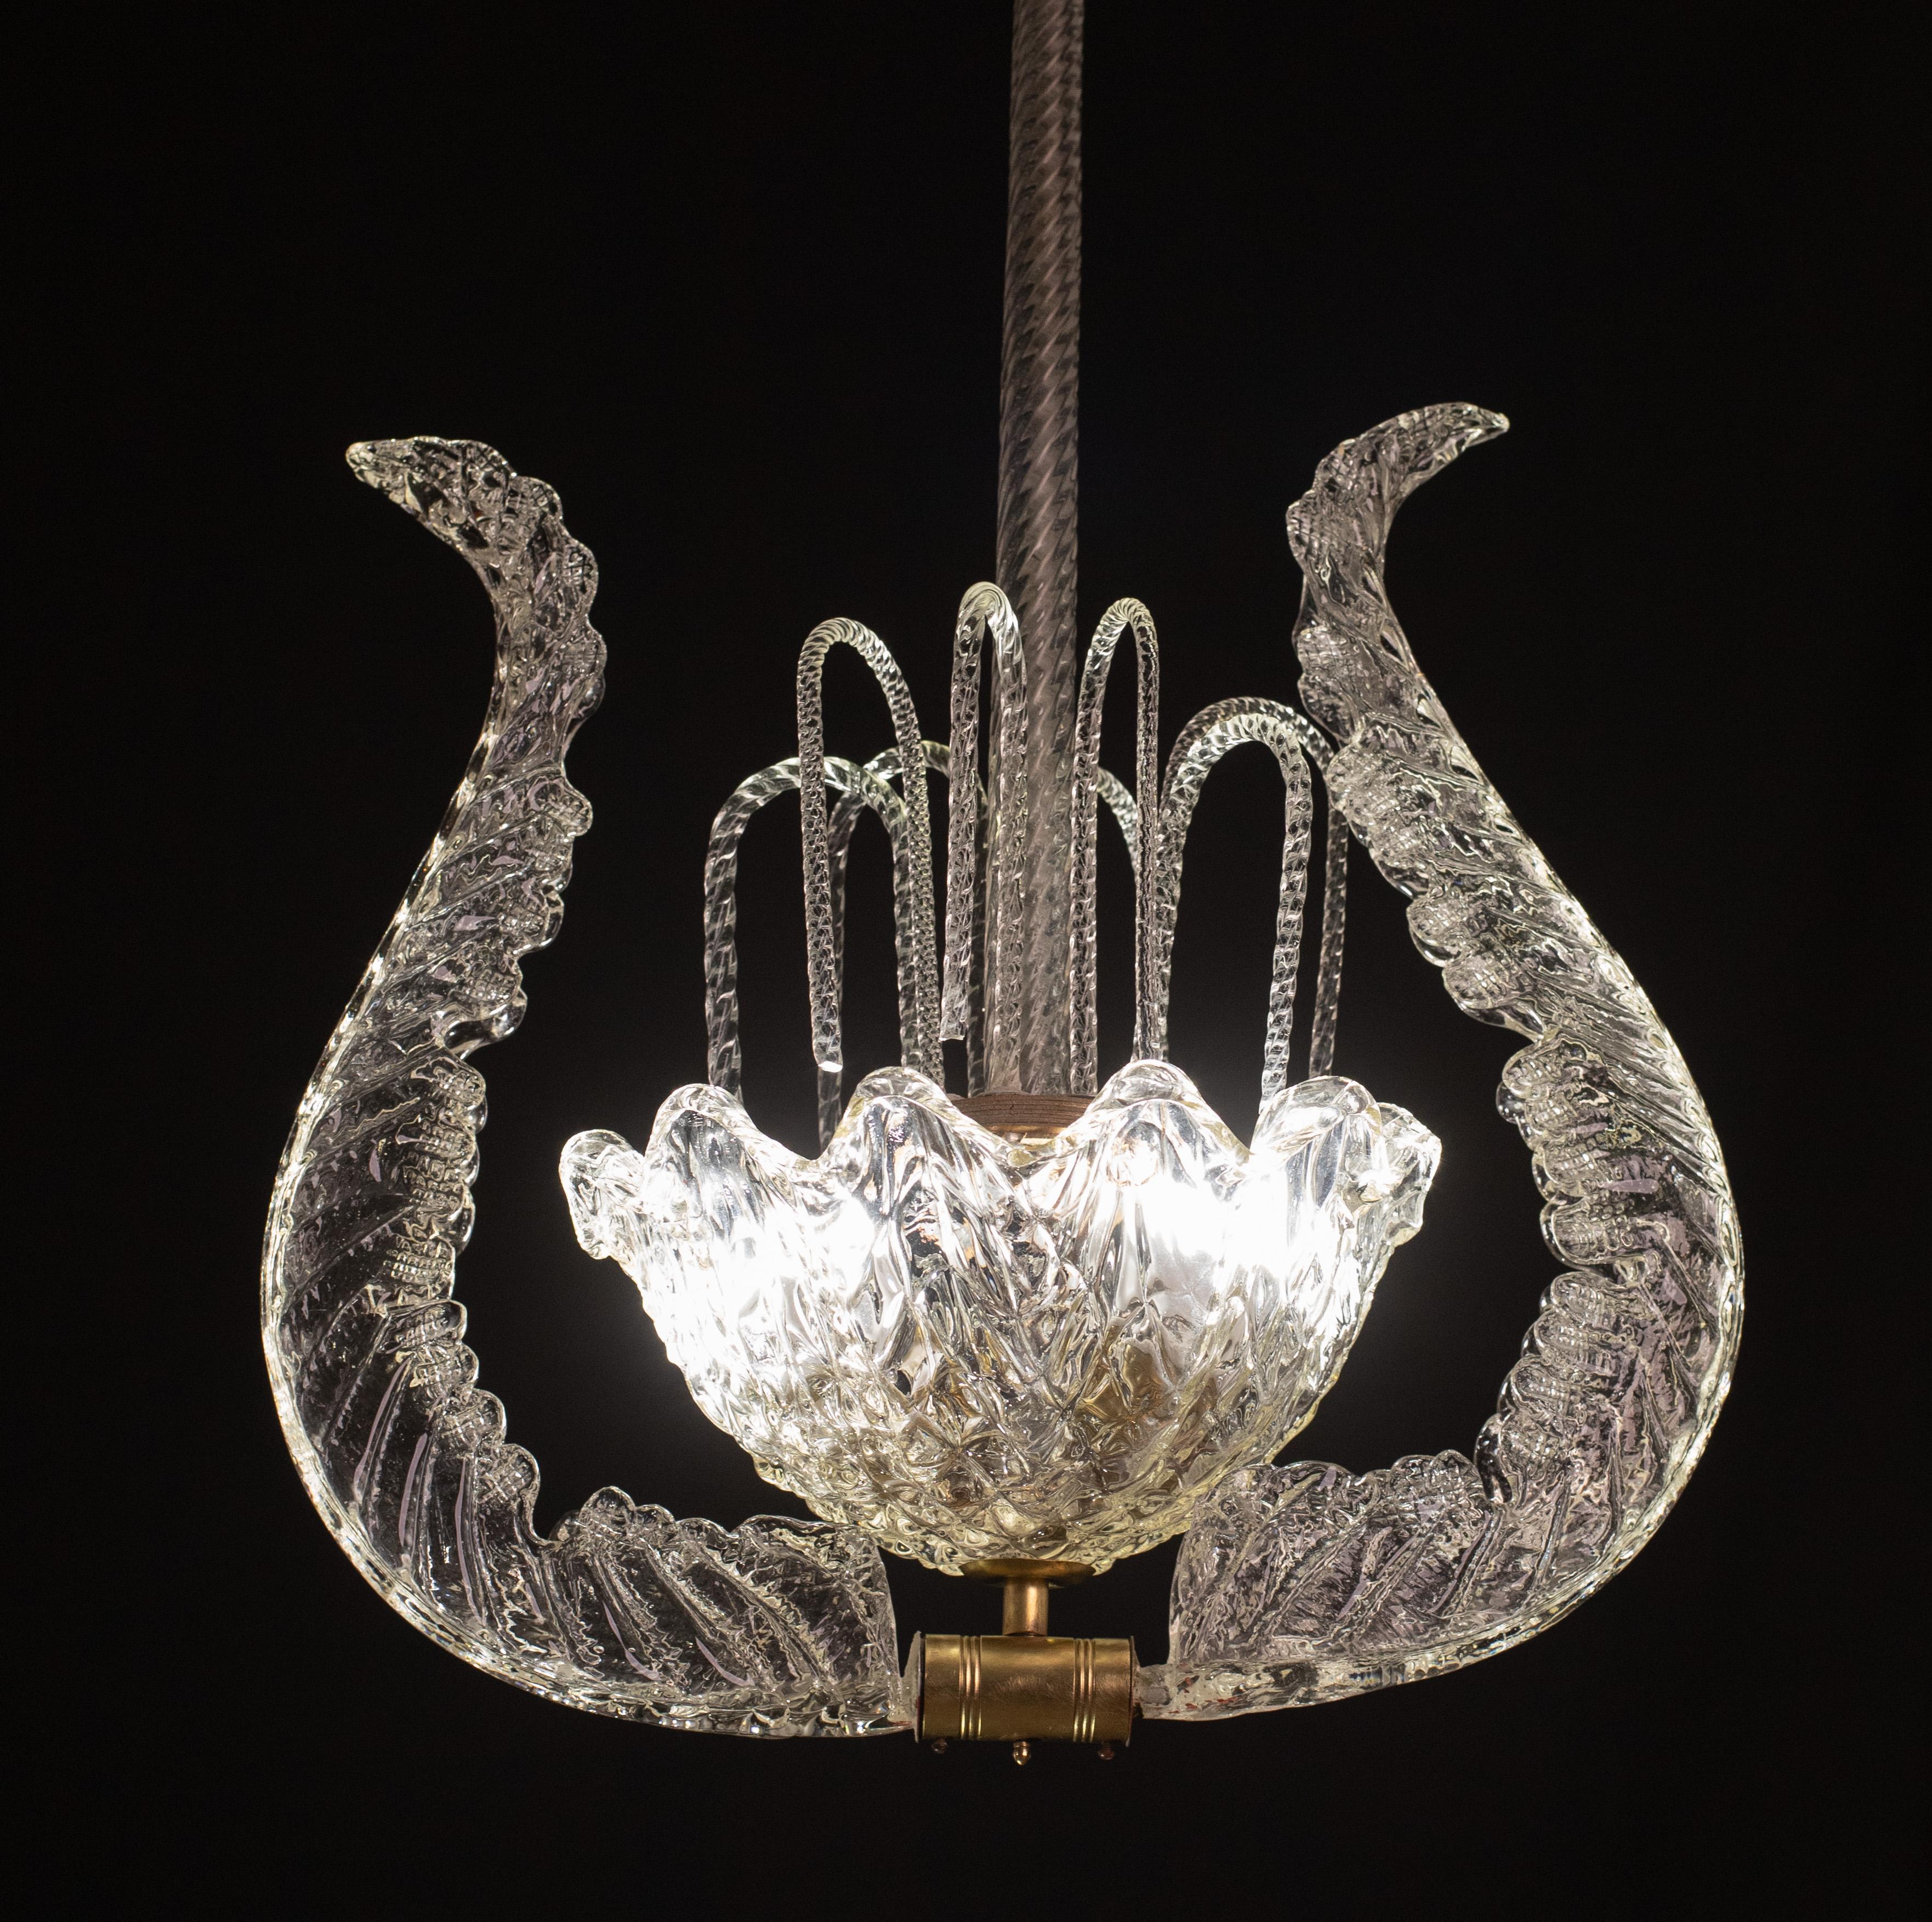  Art Decò Fountain Chandelier By Barovier e Toso, Murano Glass, 1940 In Good Condition For Sale In Roma, IT